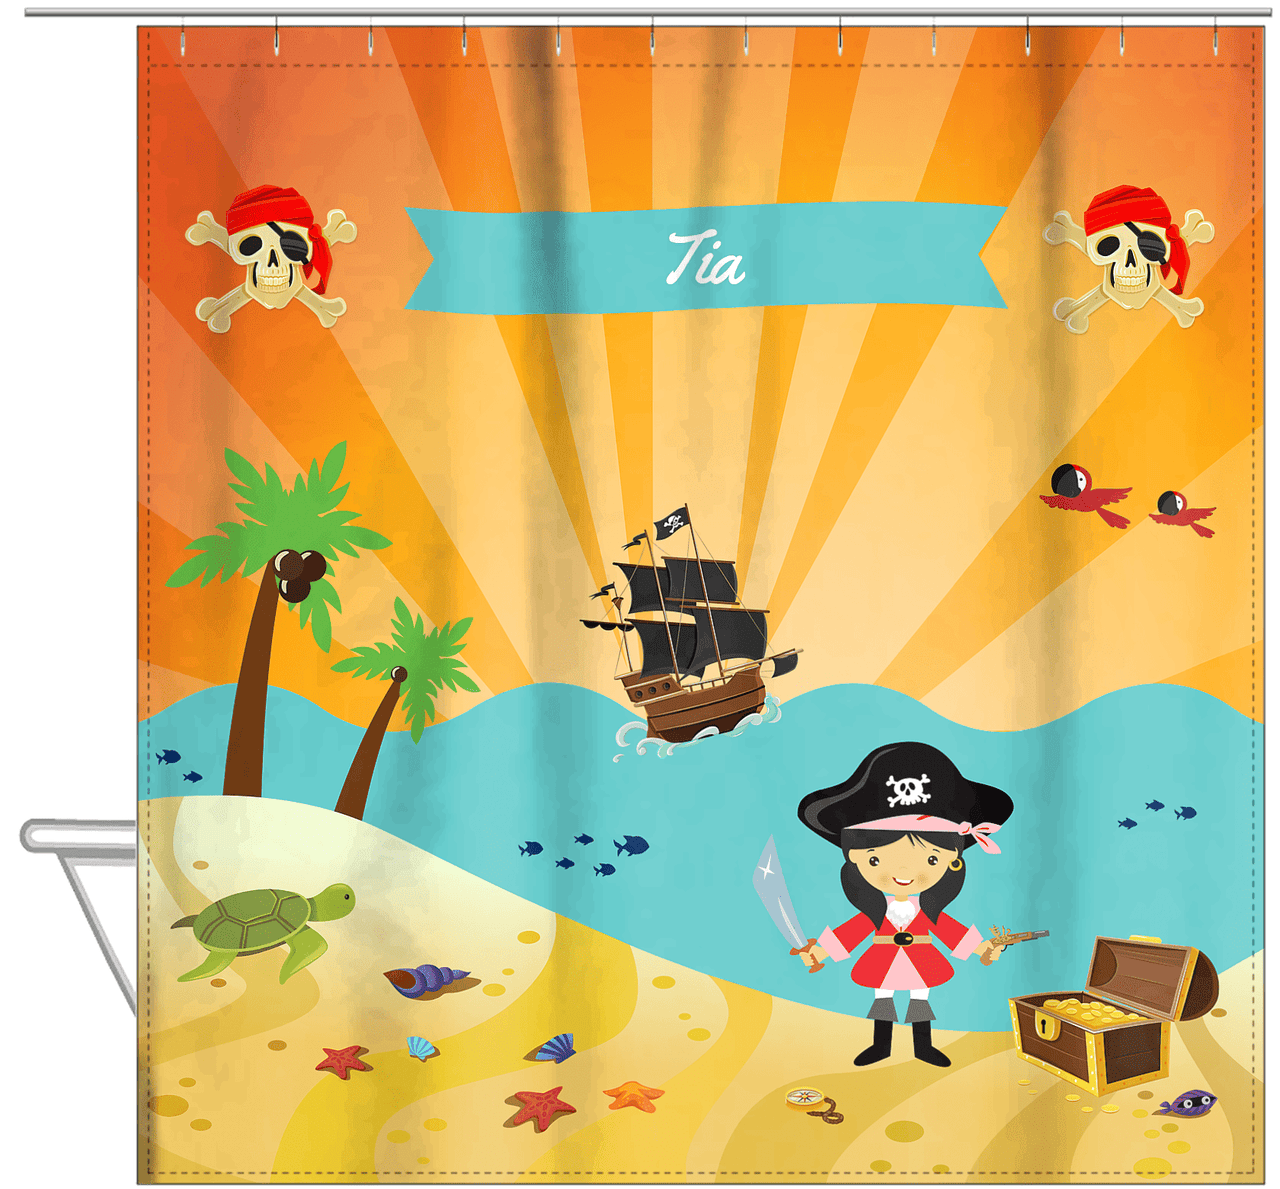 Personalized Pirate Shower Curtain XII - Orange Background - Asian Girl with Sword - Hanging View